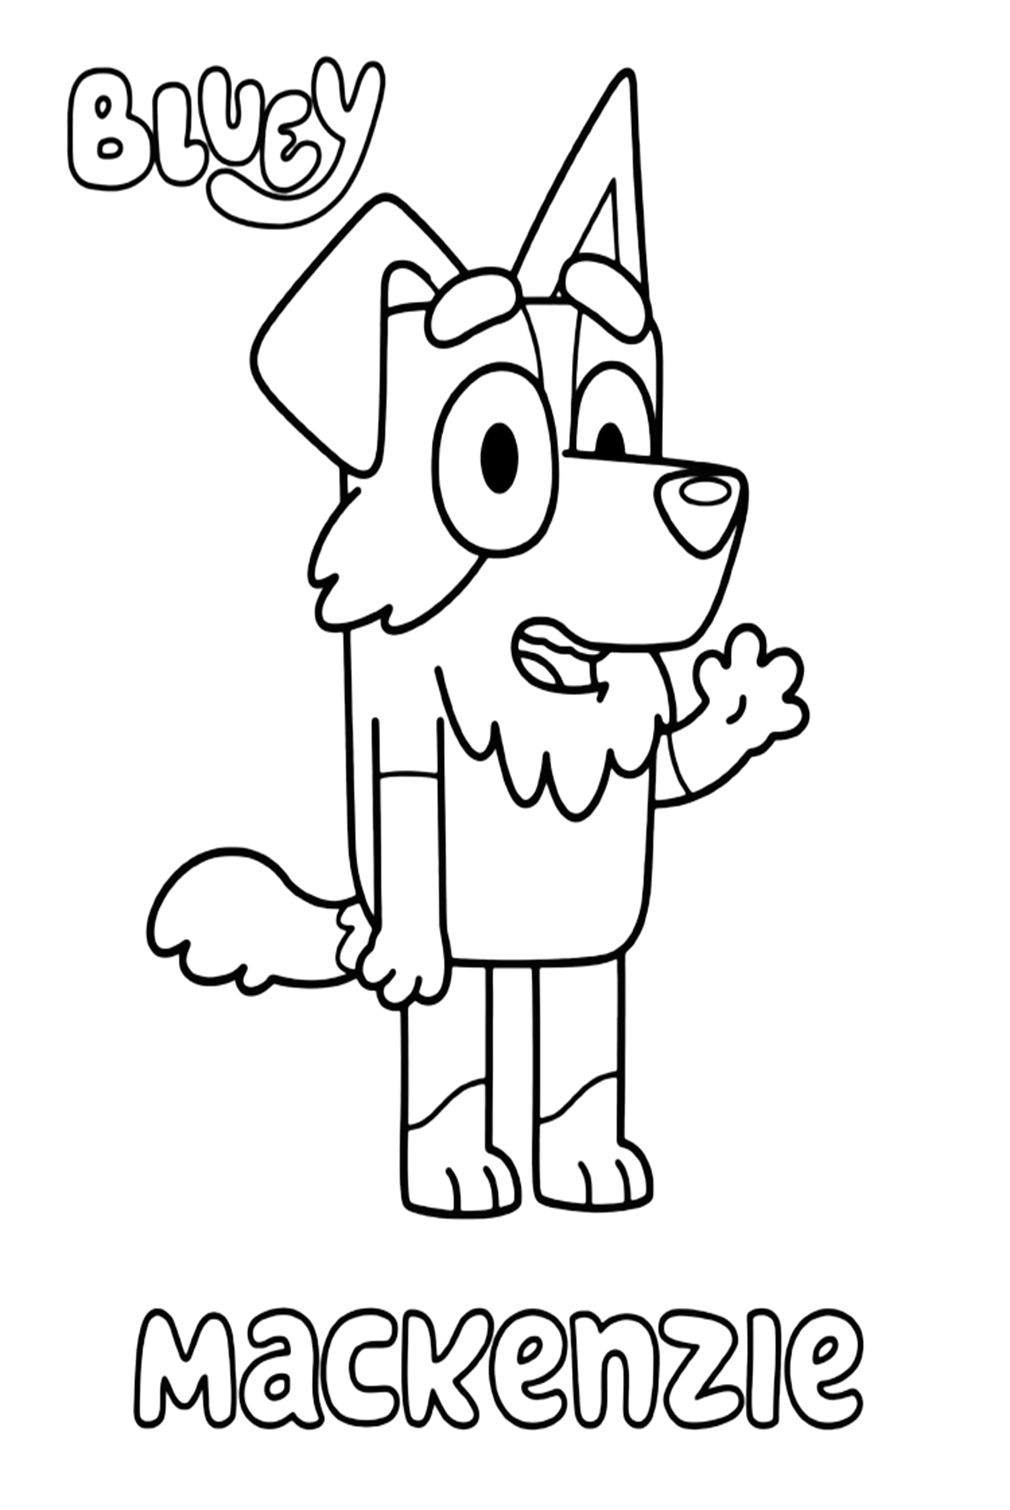 Happy Mackenzie Coloring Pages